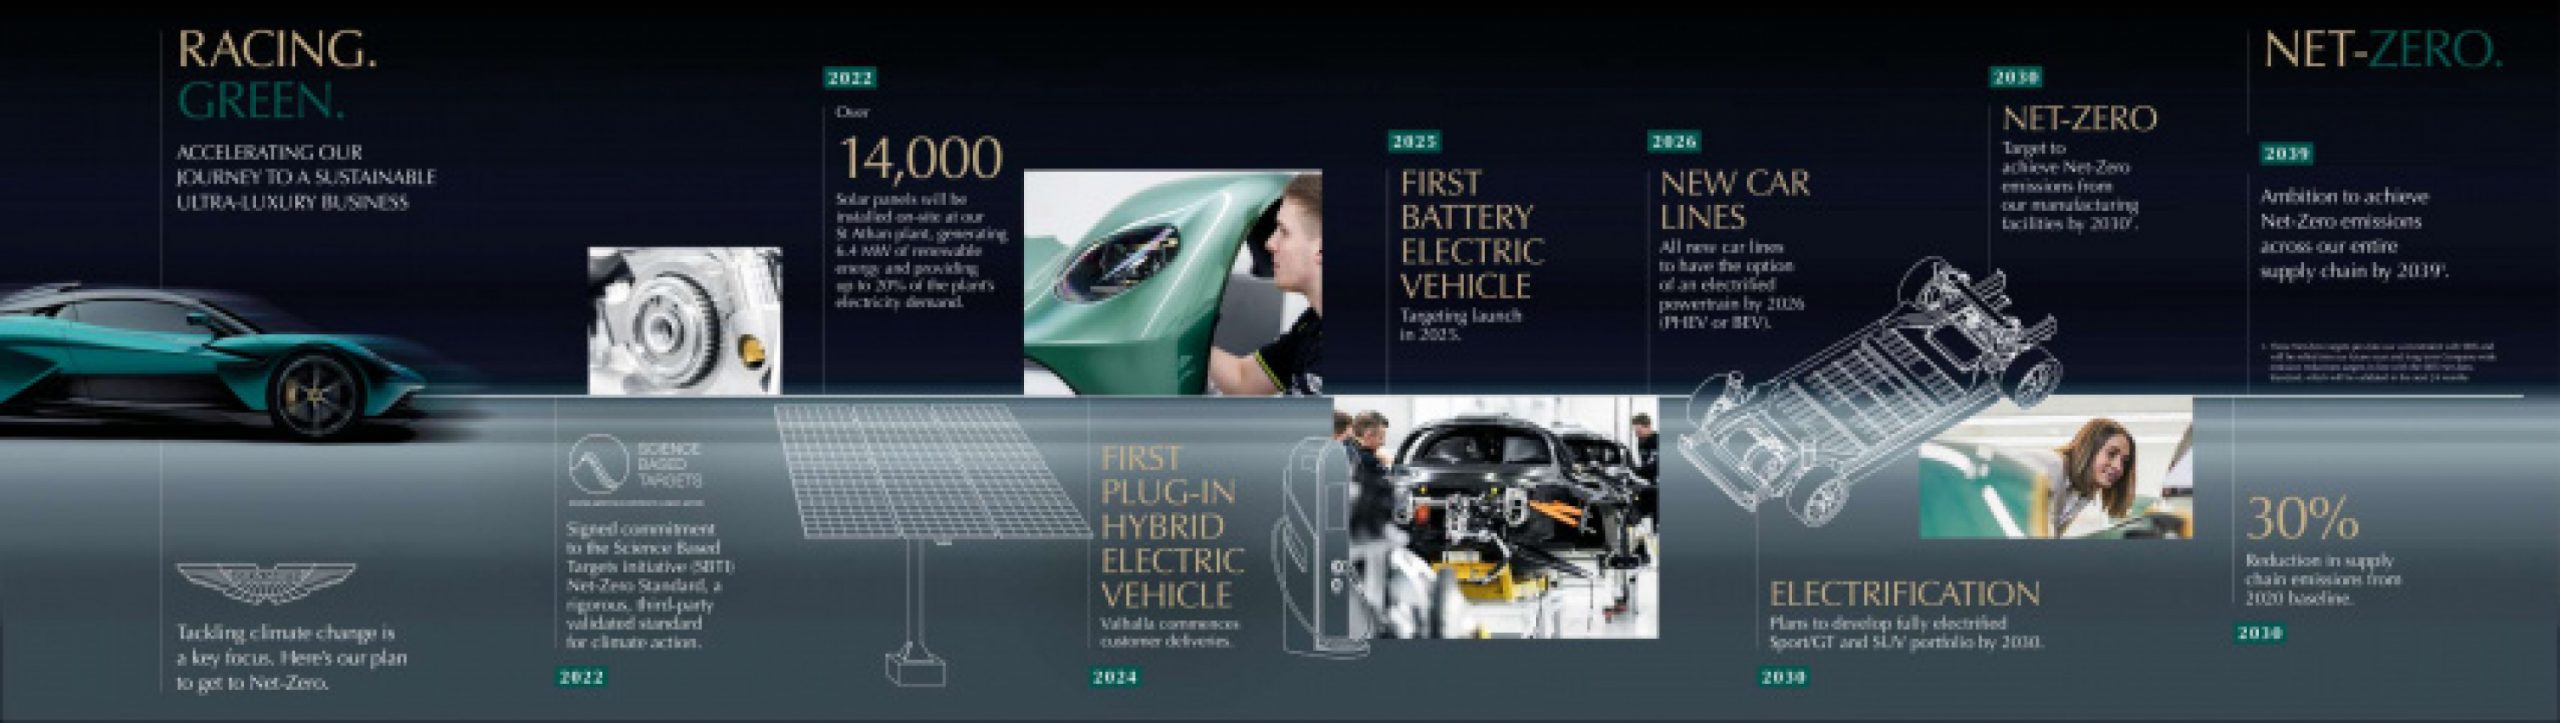 aston martin, autos, cars, electric cars, technology, racing.green, aston martin plans to be net carbon zero by 2039